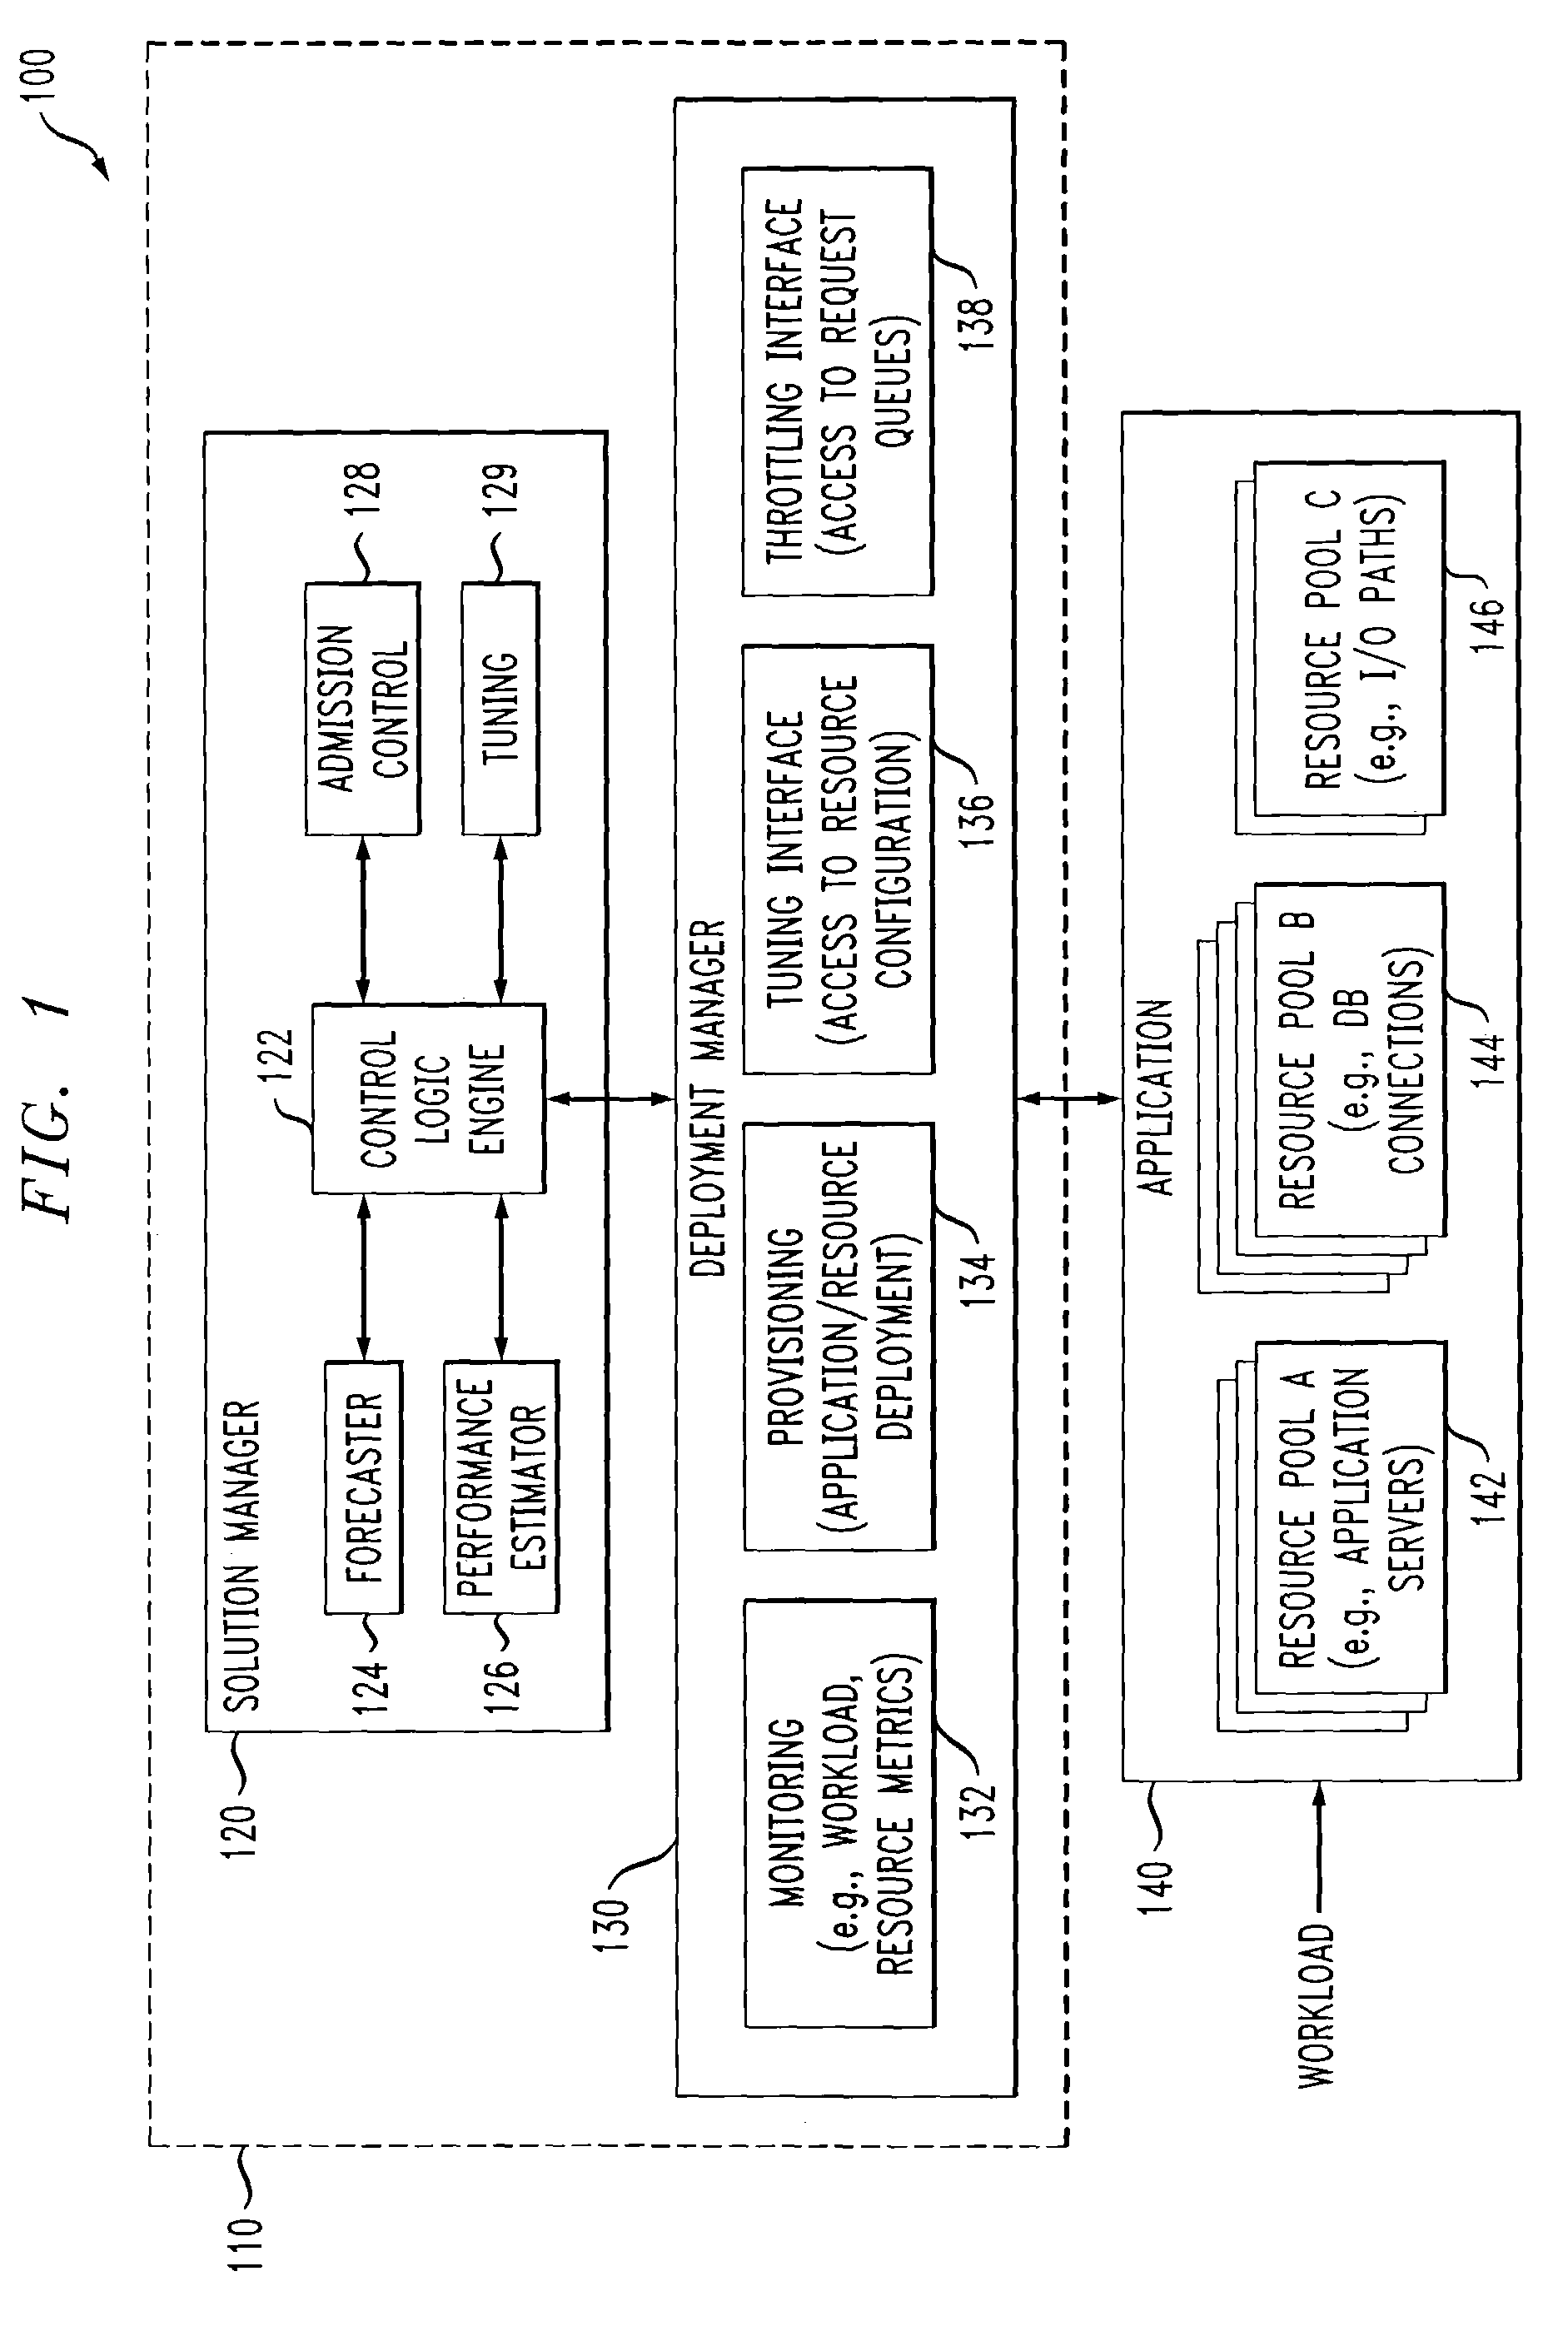 Methods and apparatus for managing computing deployment in presence of variable workload